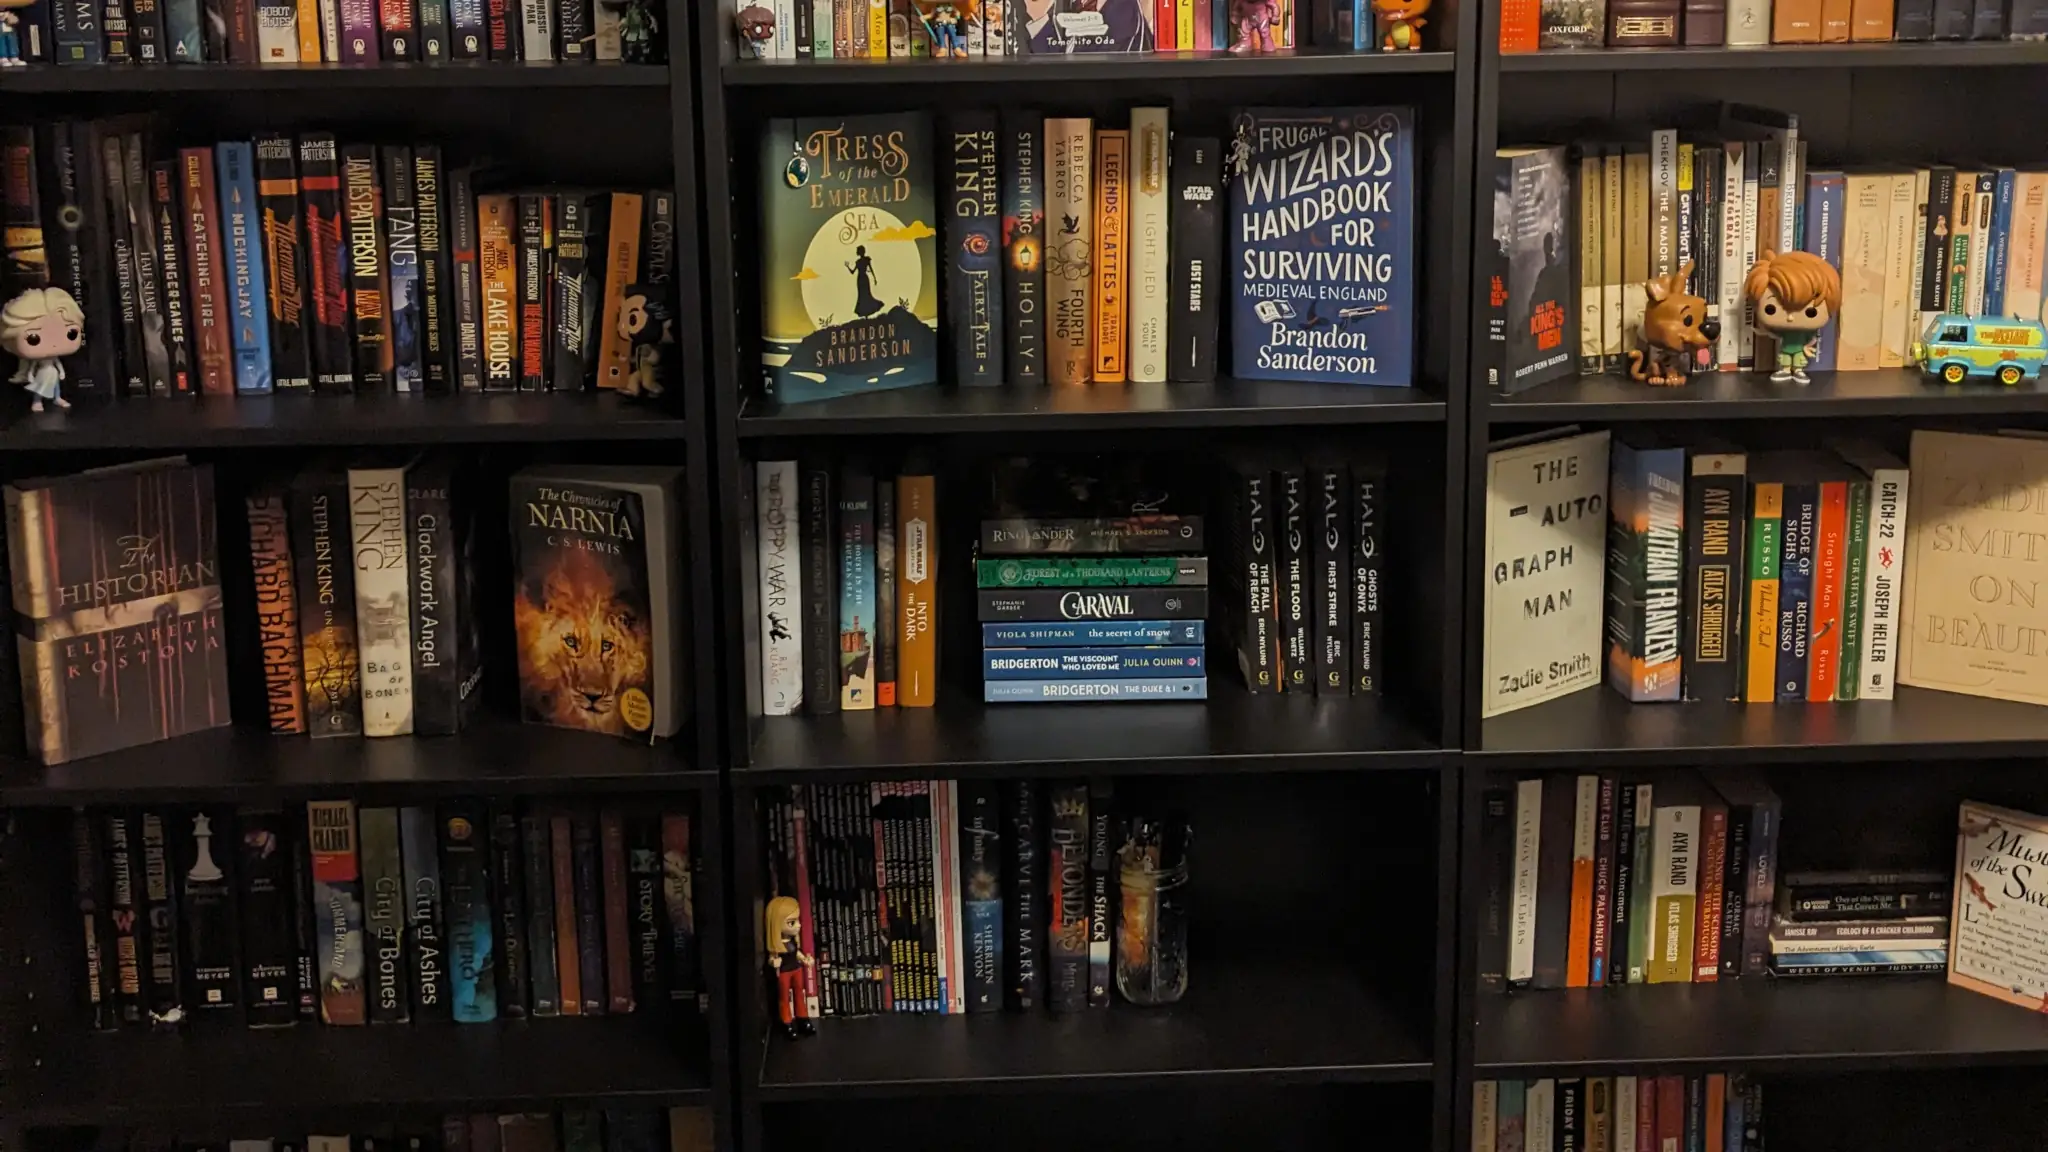 Horizontal image of three bookshelves next to each other and filled with books.